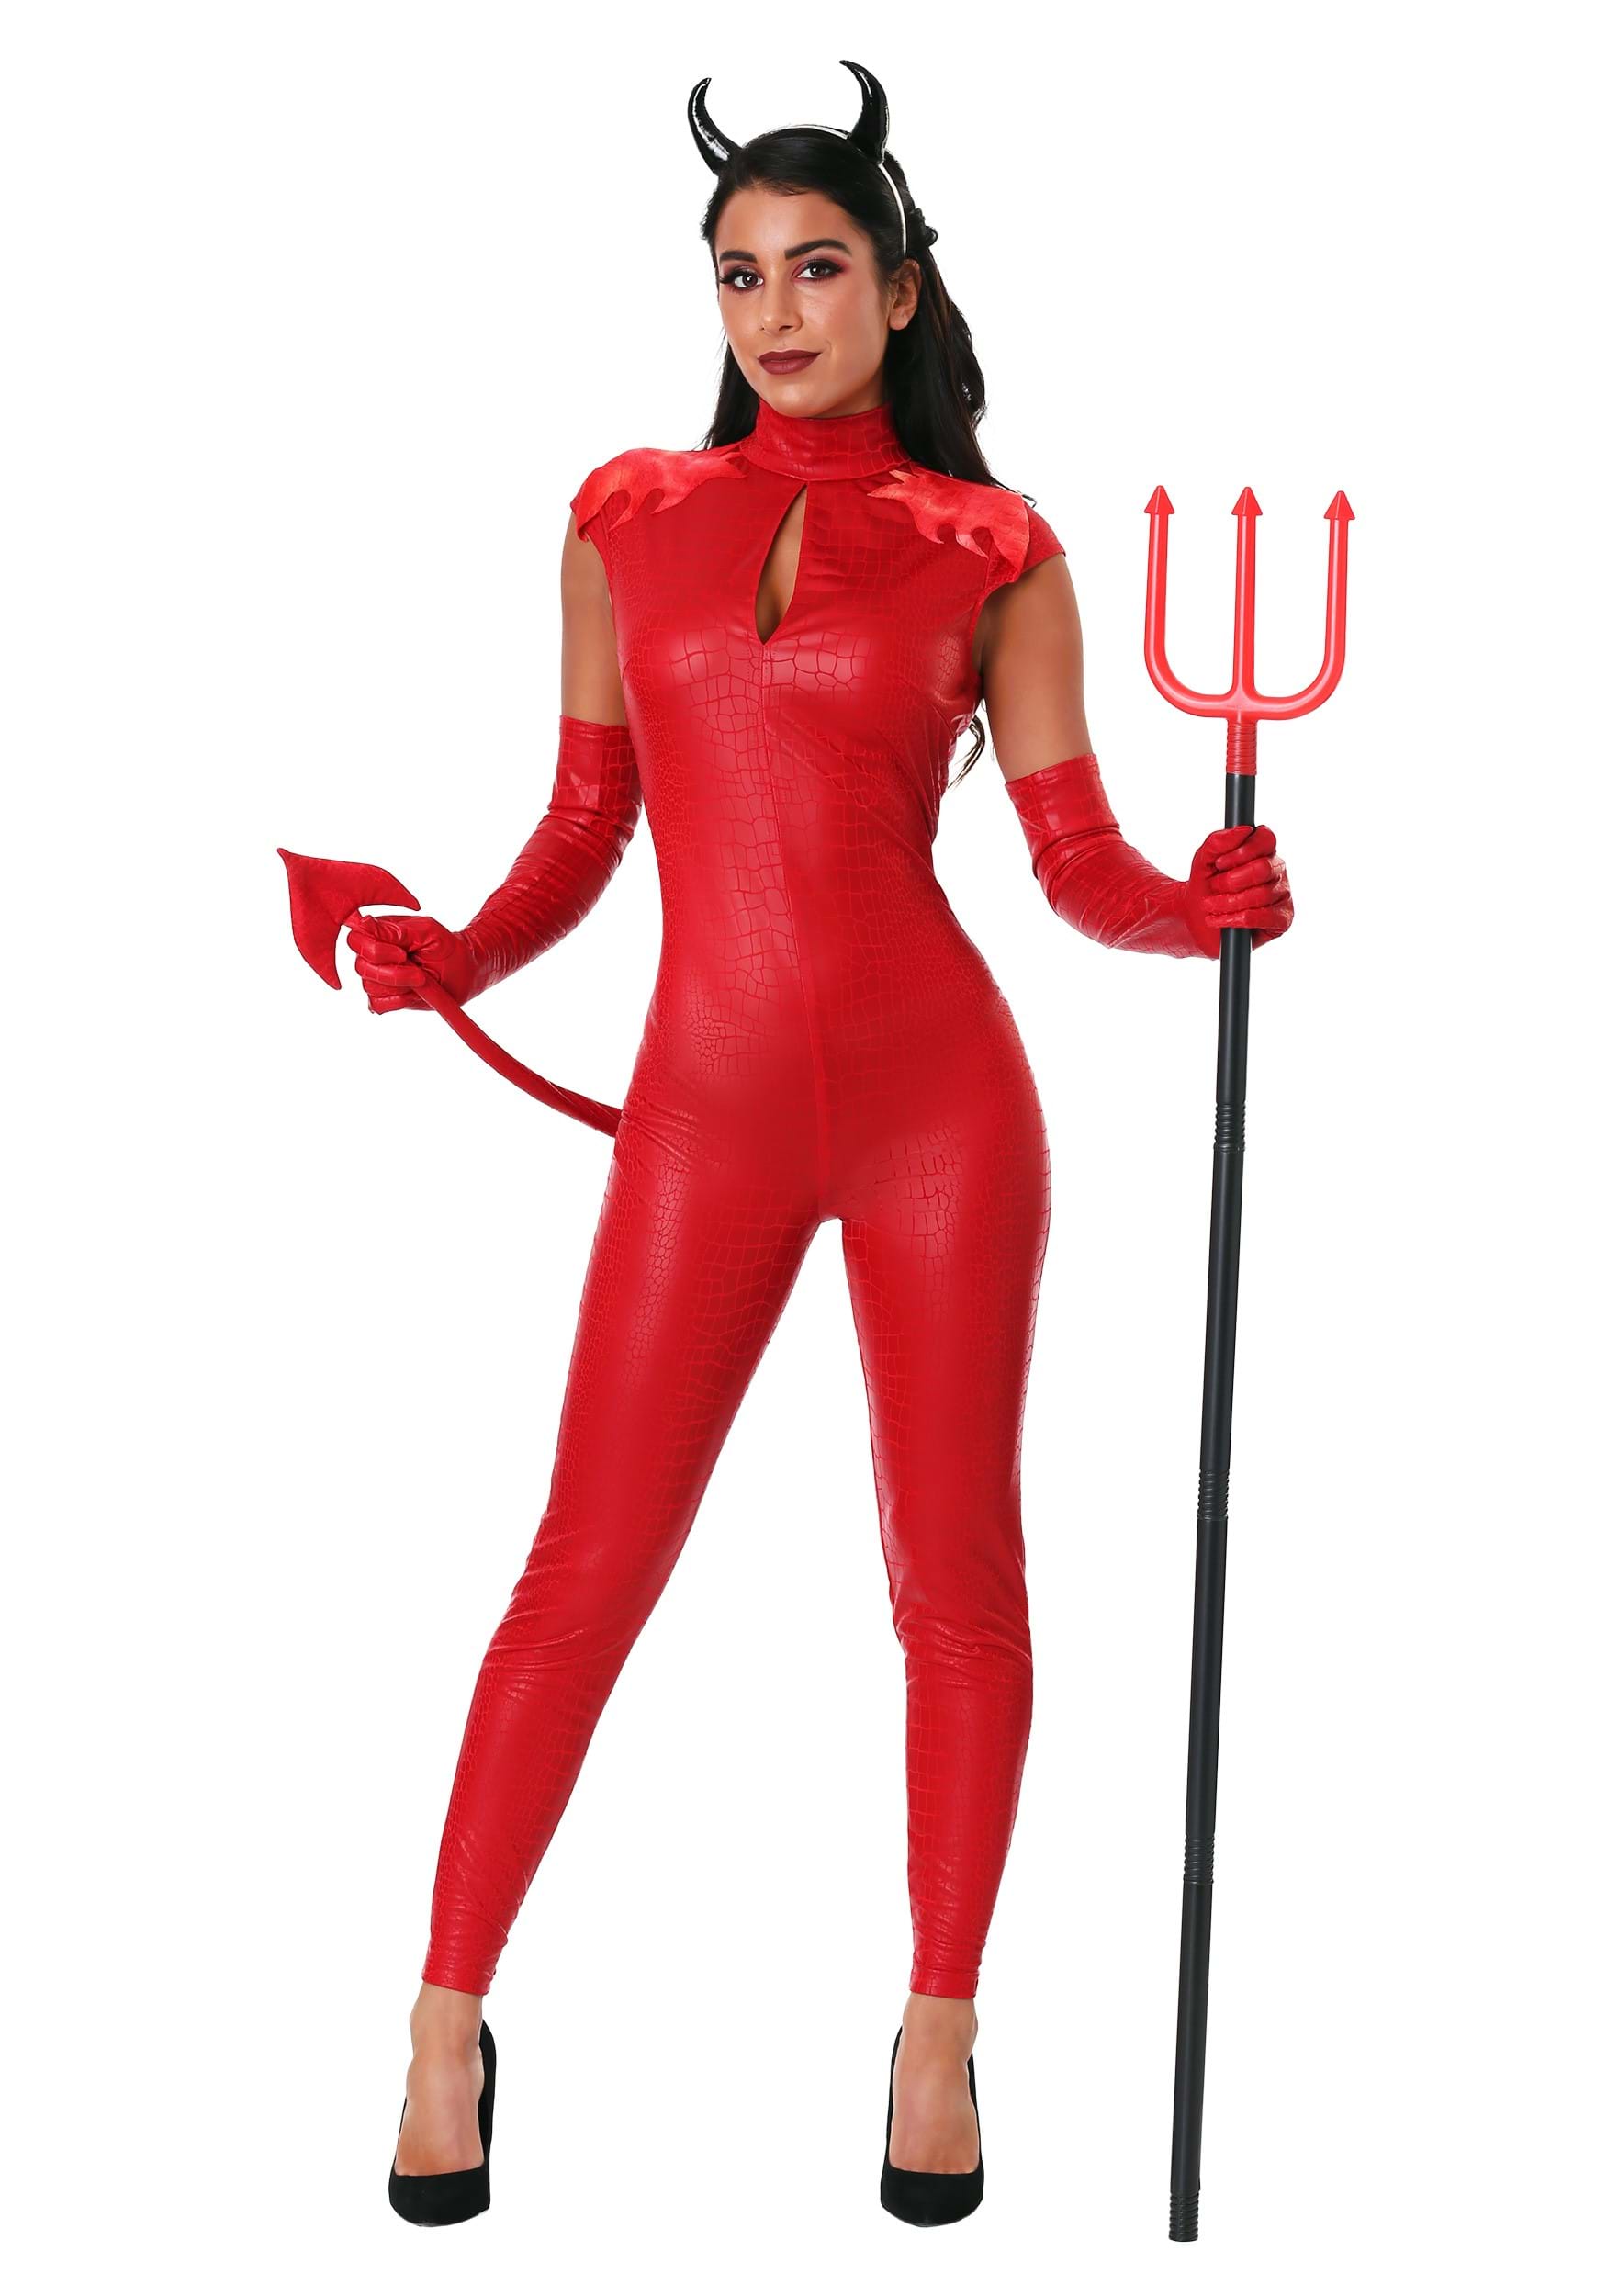 Costume for Adults Female demon